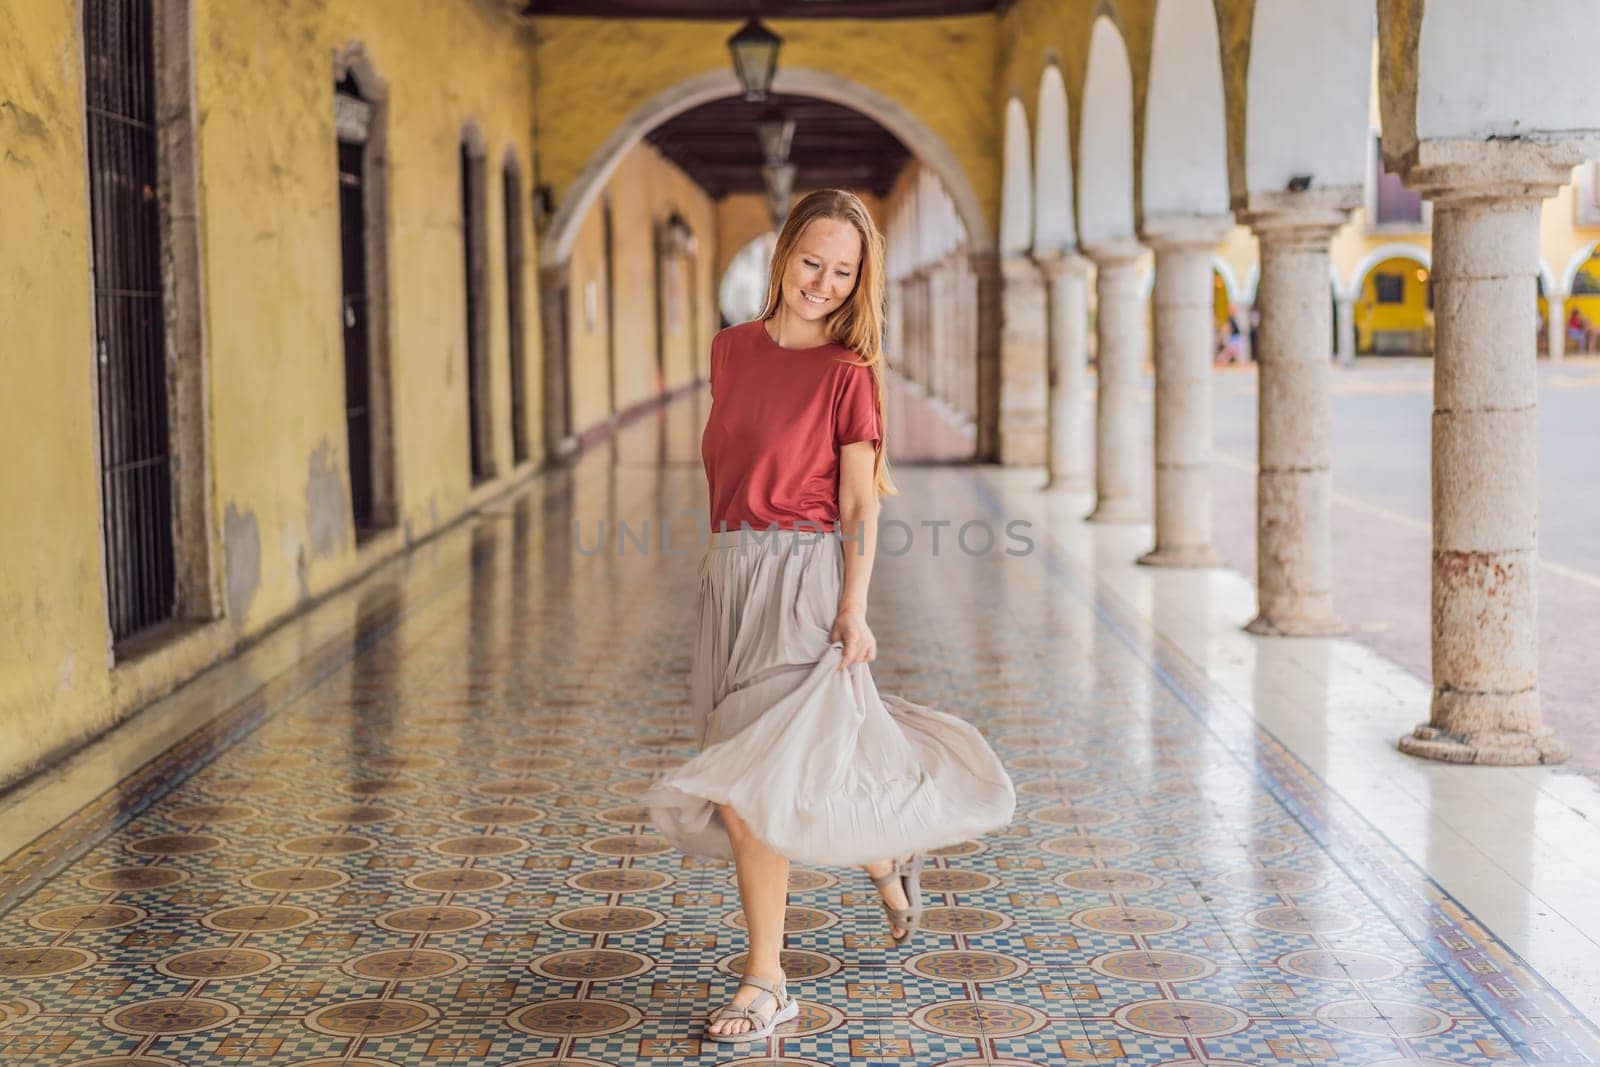 Woman tourist explores the vibrant streets of Valladolid, Mexico, immersing herself in the rich culture and colorful architecture of this charming colonial town.